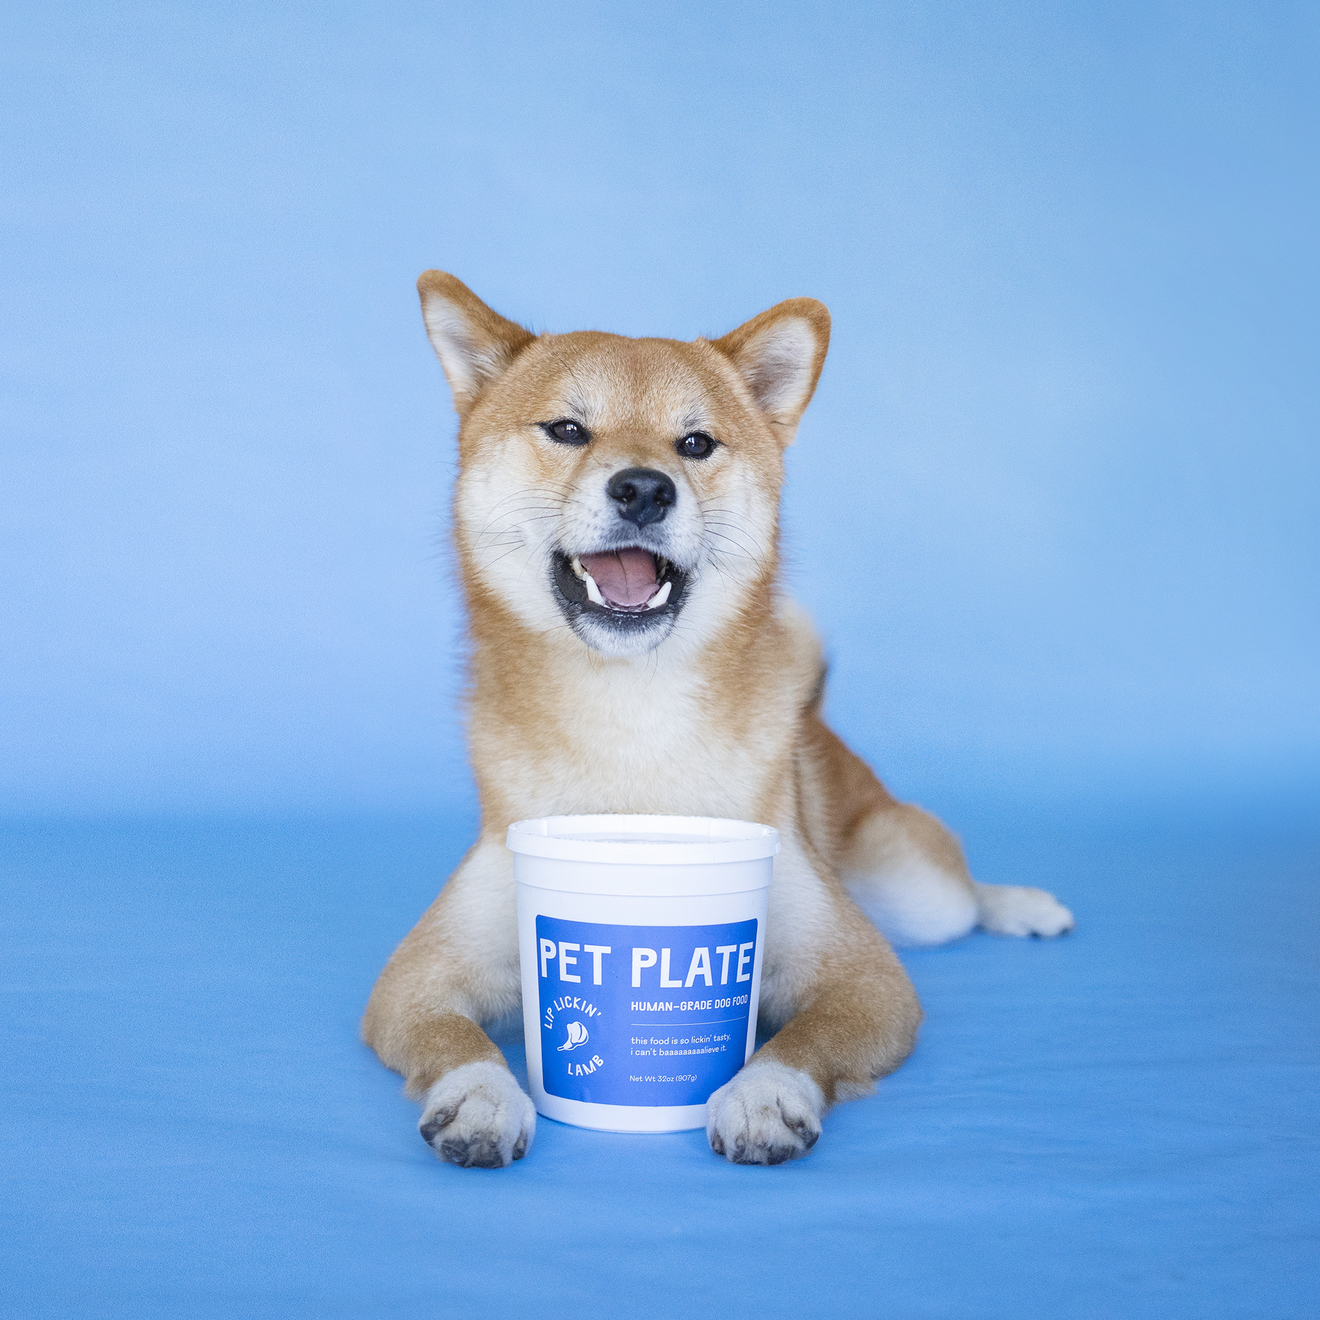 A dog with a Pet Plate container